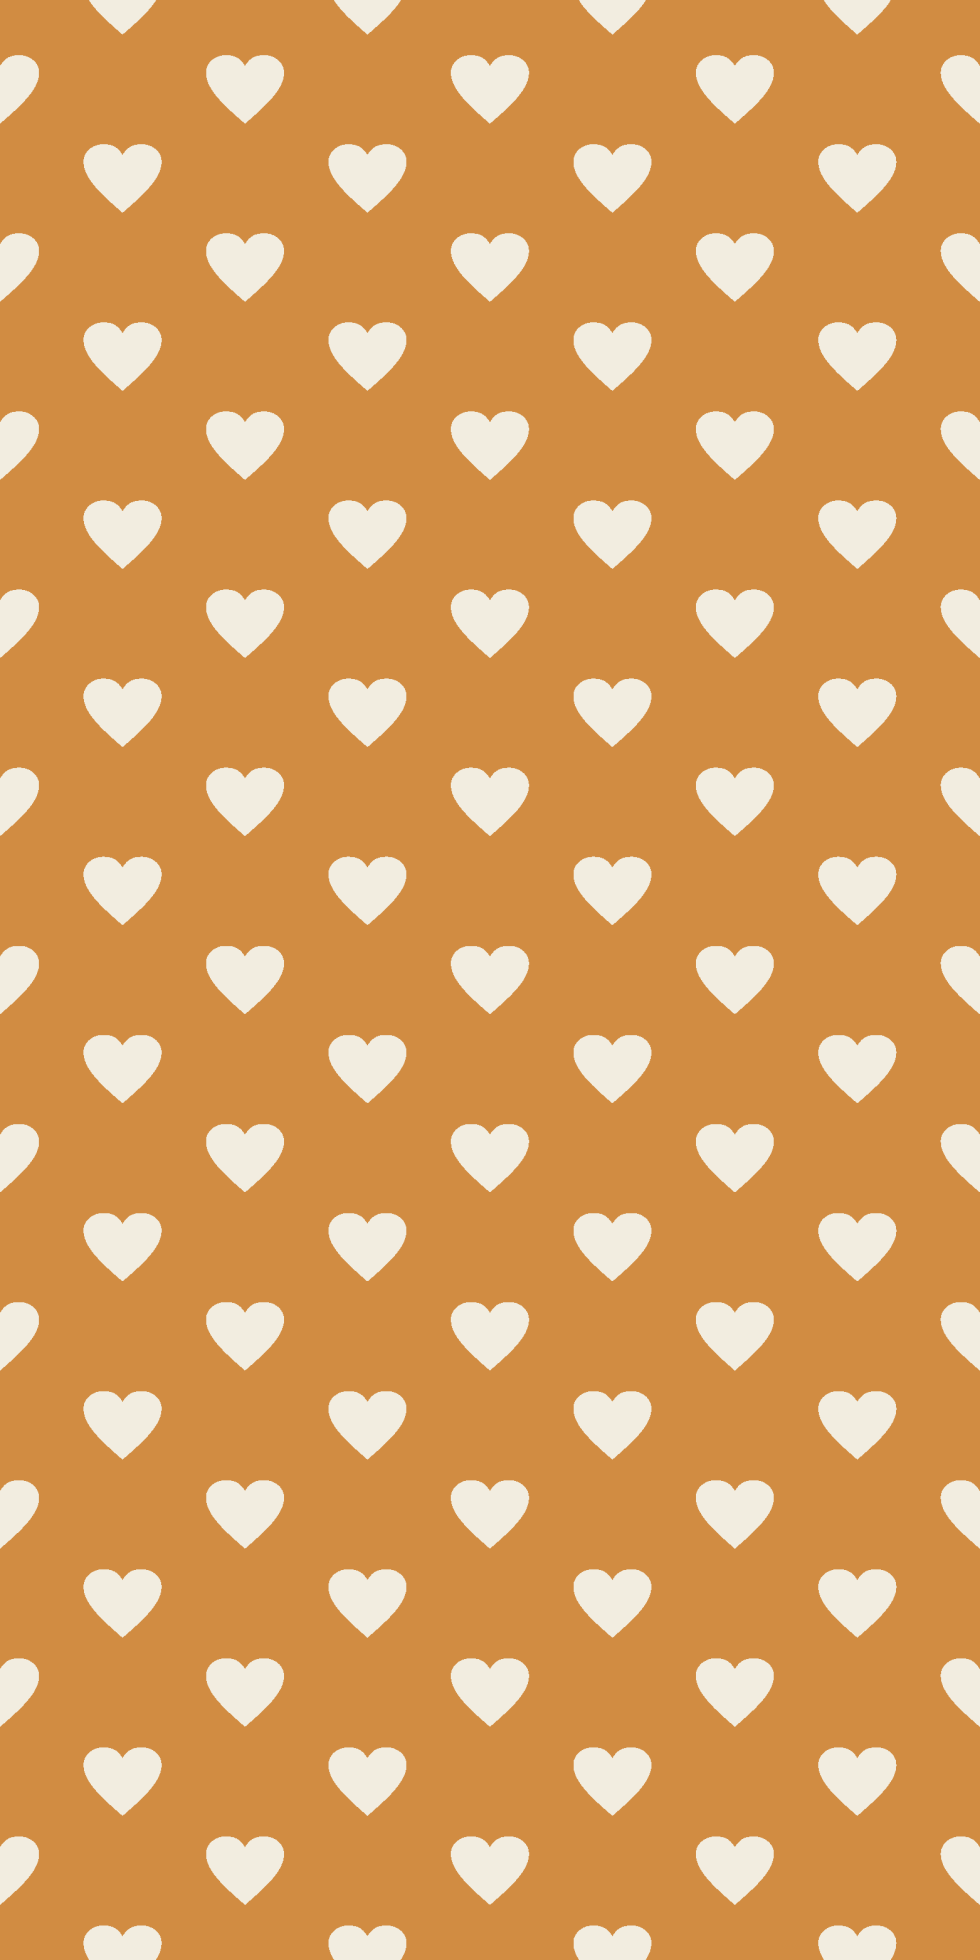 A brown and white polka dot pattern background - Cute fall